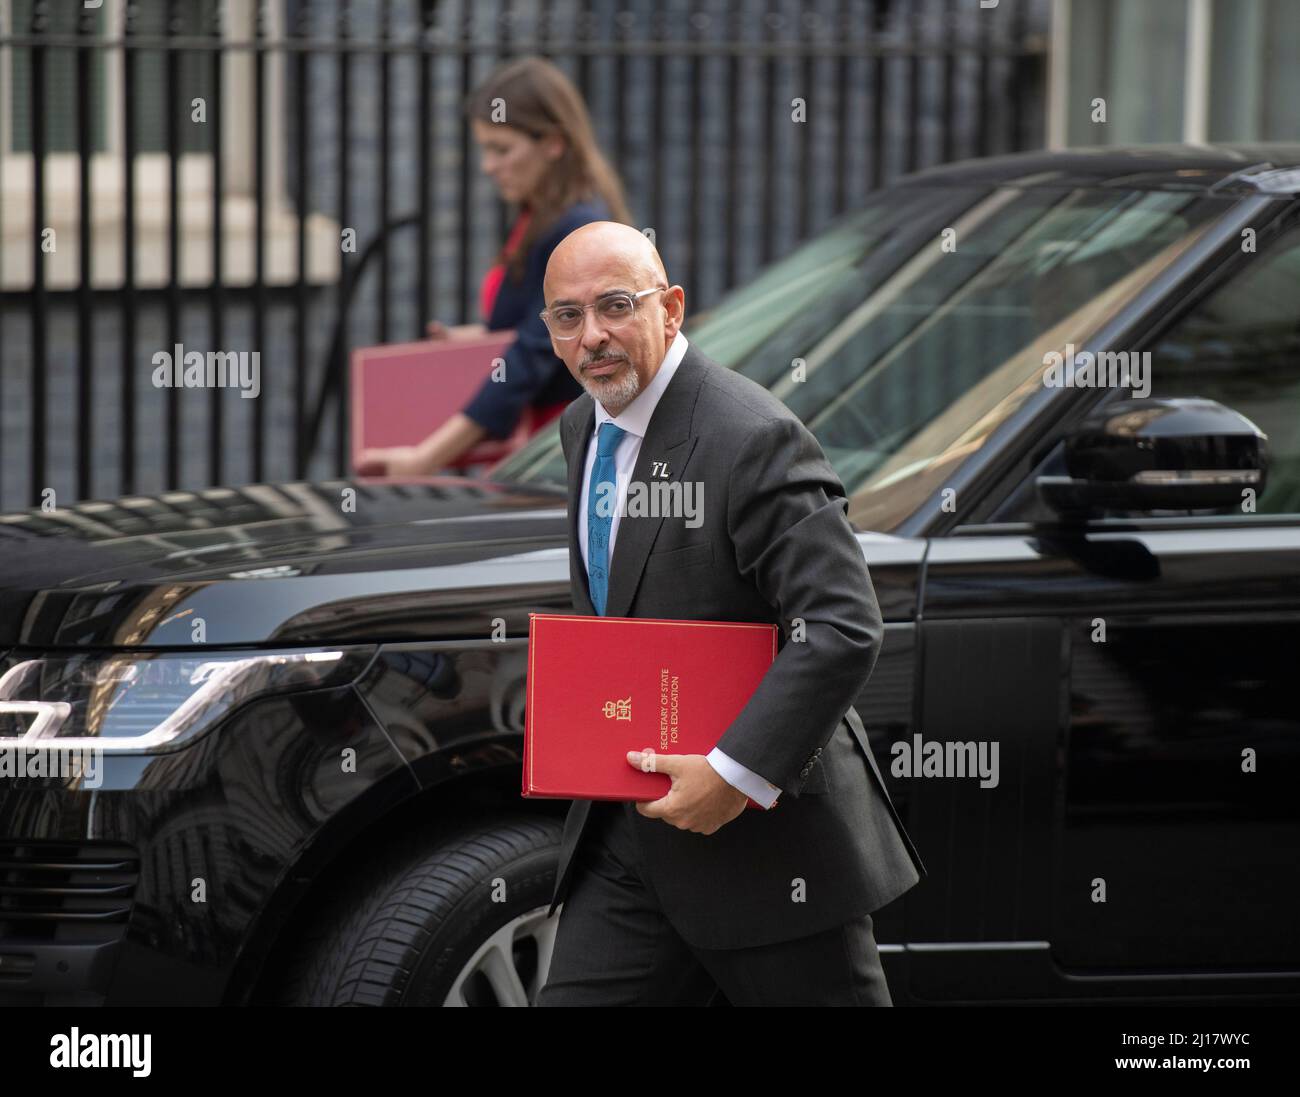 Downing Street, London, UK. 23 March 2022. Nadhim Zahawi MP, Secretary of State for Education, in Downing Street for weekly cabinet meeting. Credit: Malcolm Park/Alamy Live News. Stock Photo